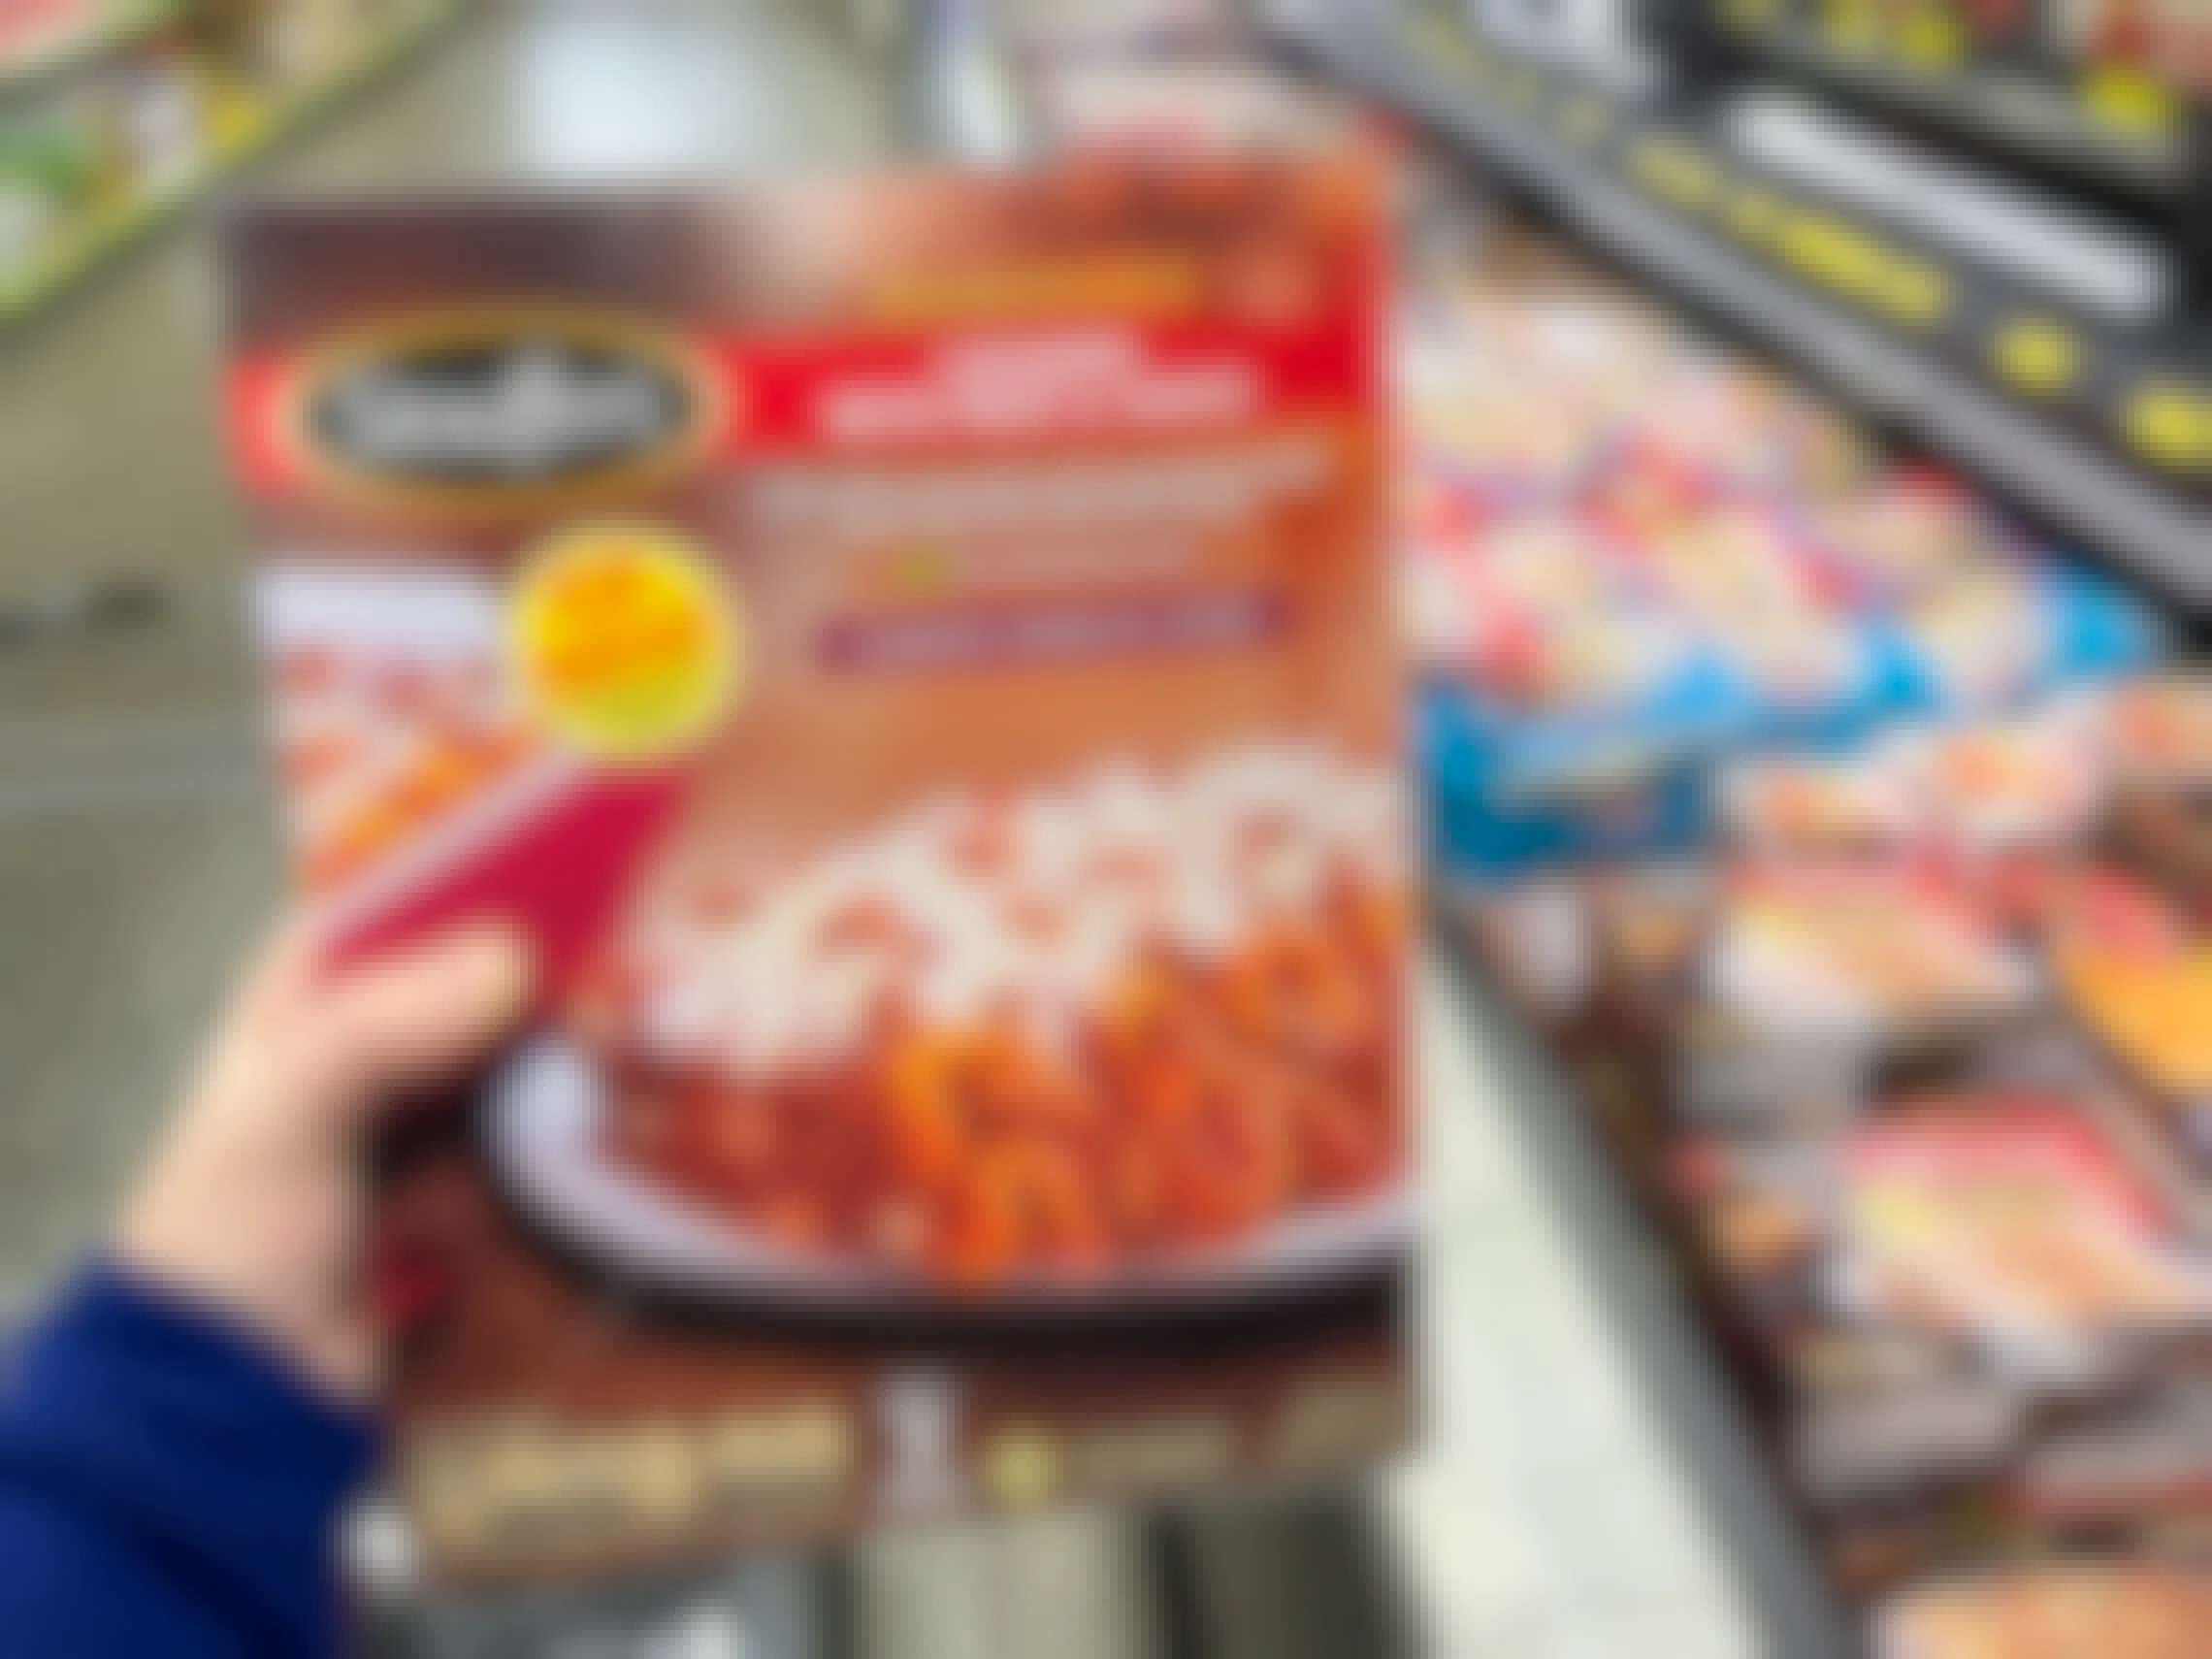 A box of stouffers lasagna in the frozen food section in Grocery Outlet.